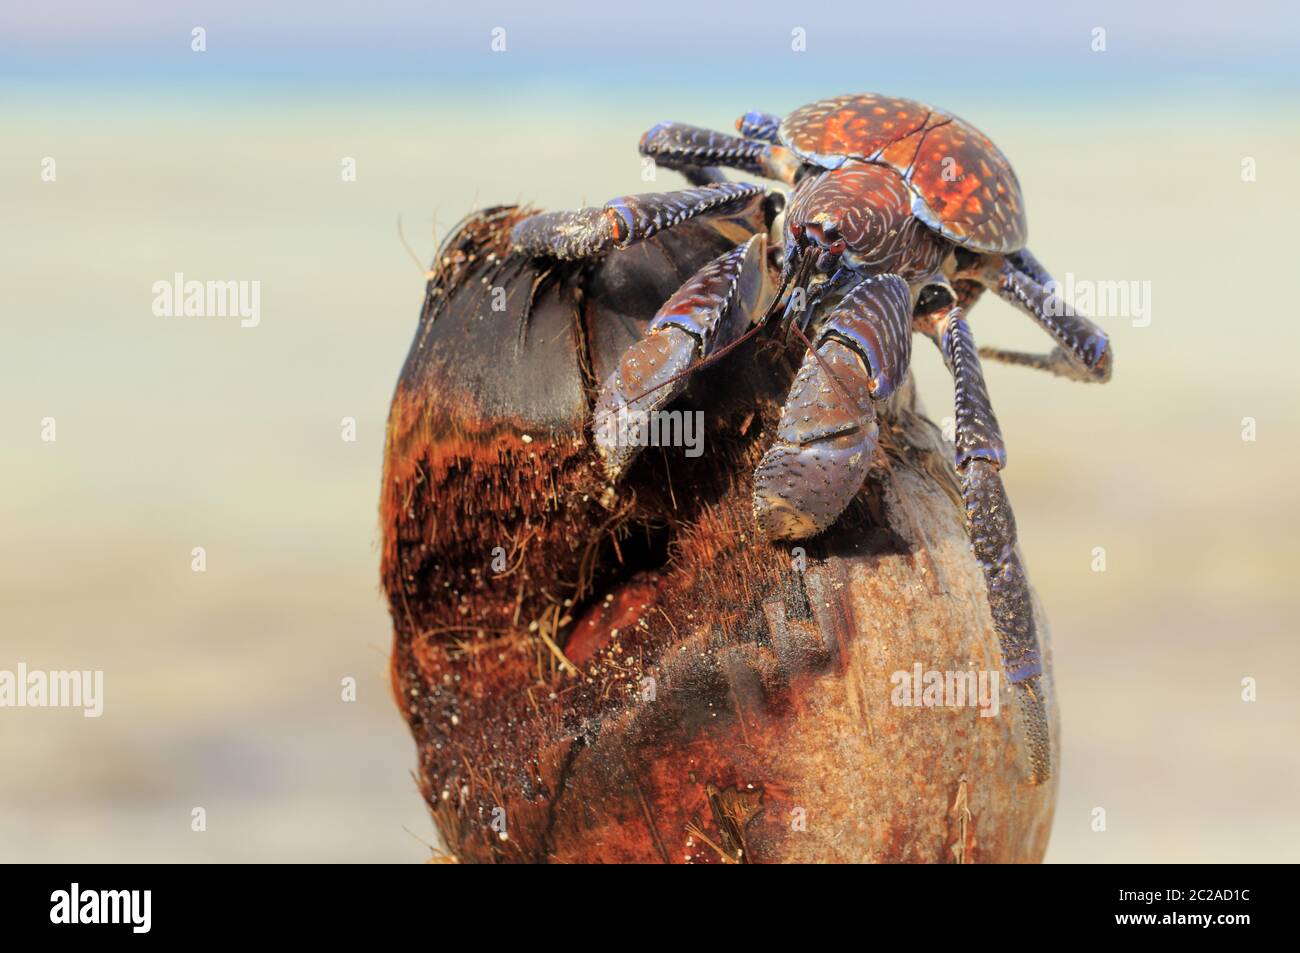 Coconut crab on the coconut Stock Photo